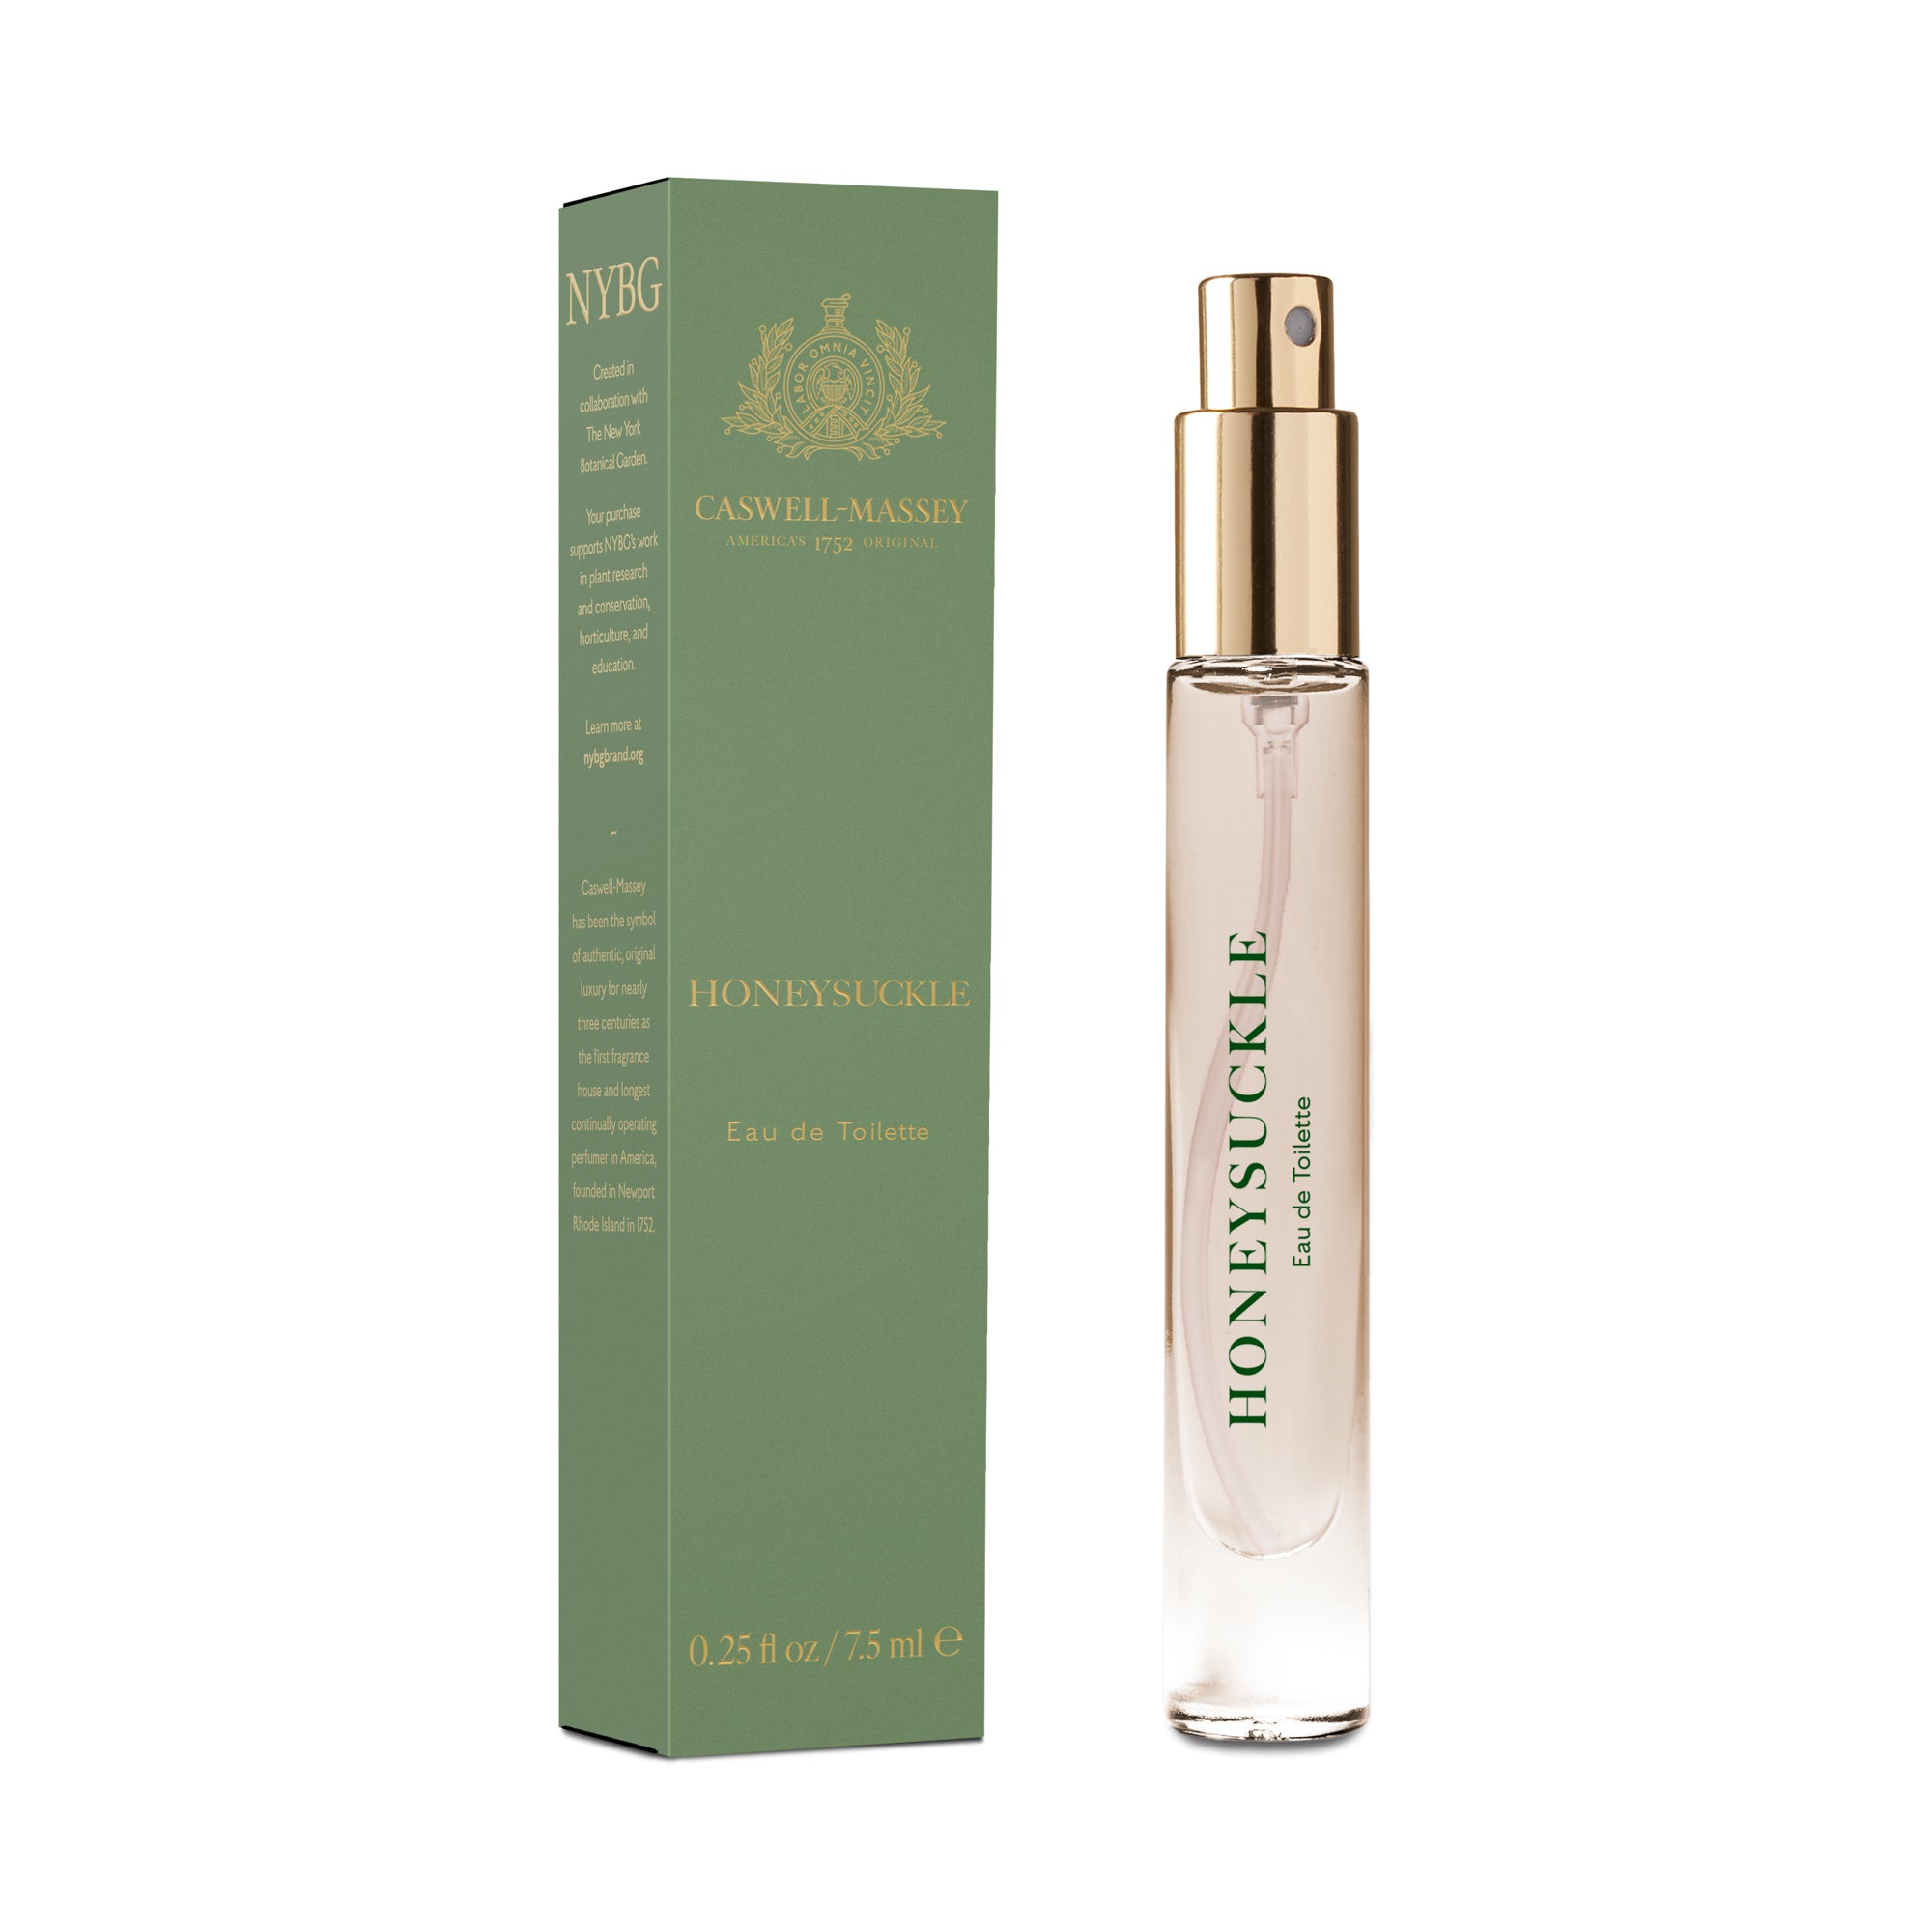 Honeysuckle EDT by Caswell-Massey 7.5mL travel discovery size, shown with pale green box